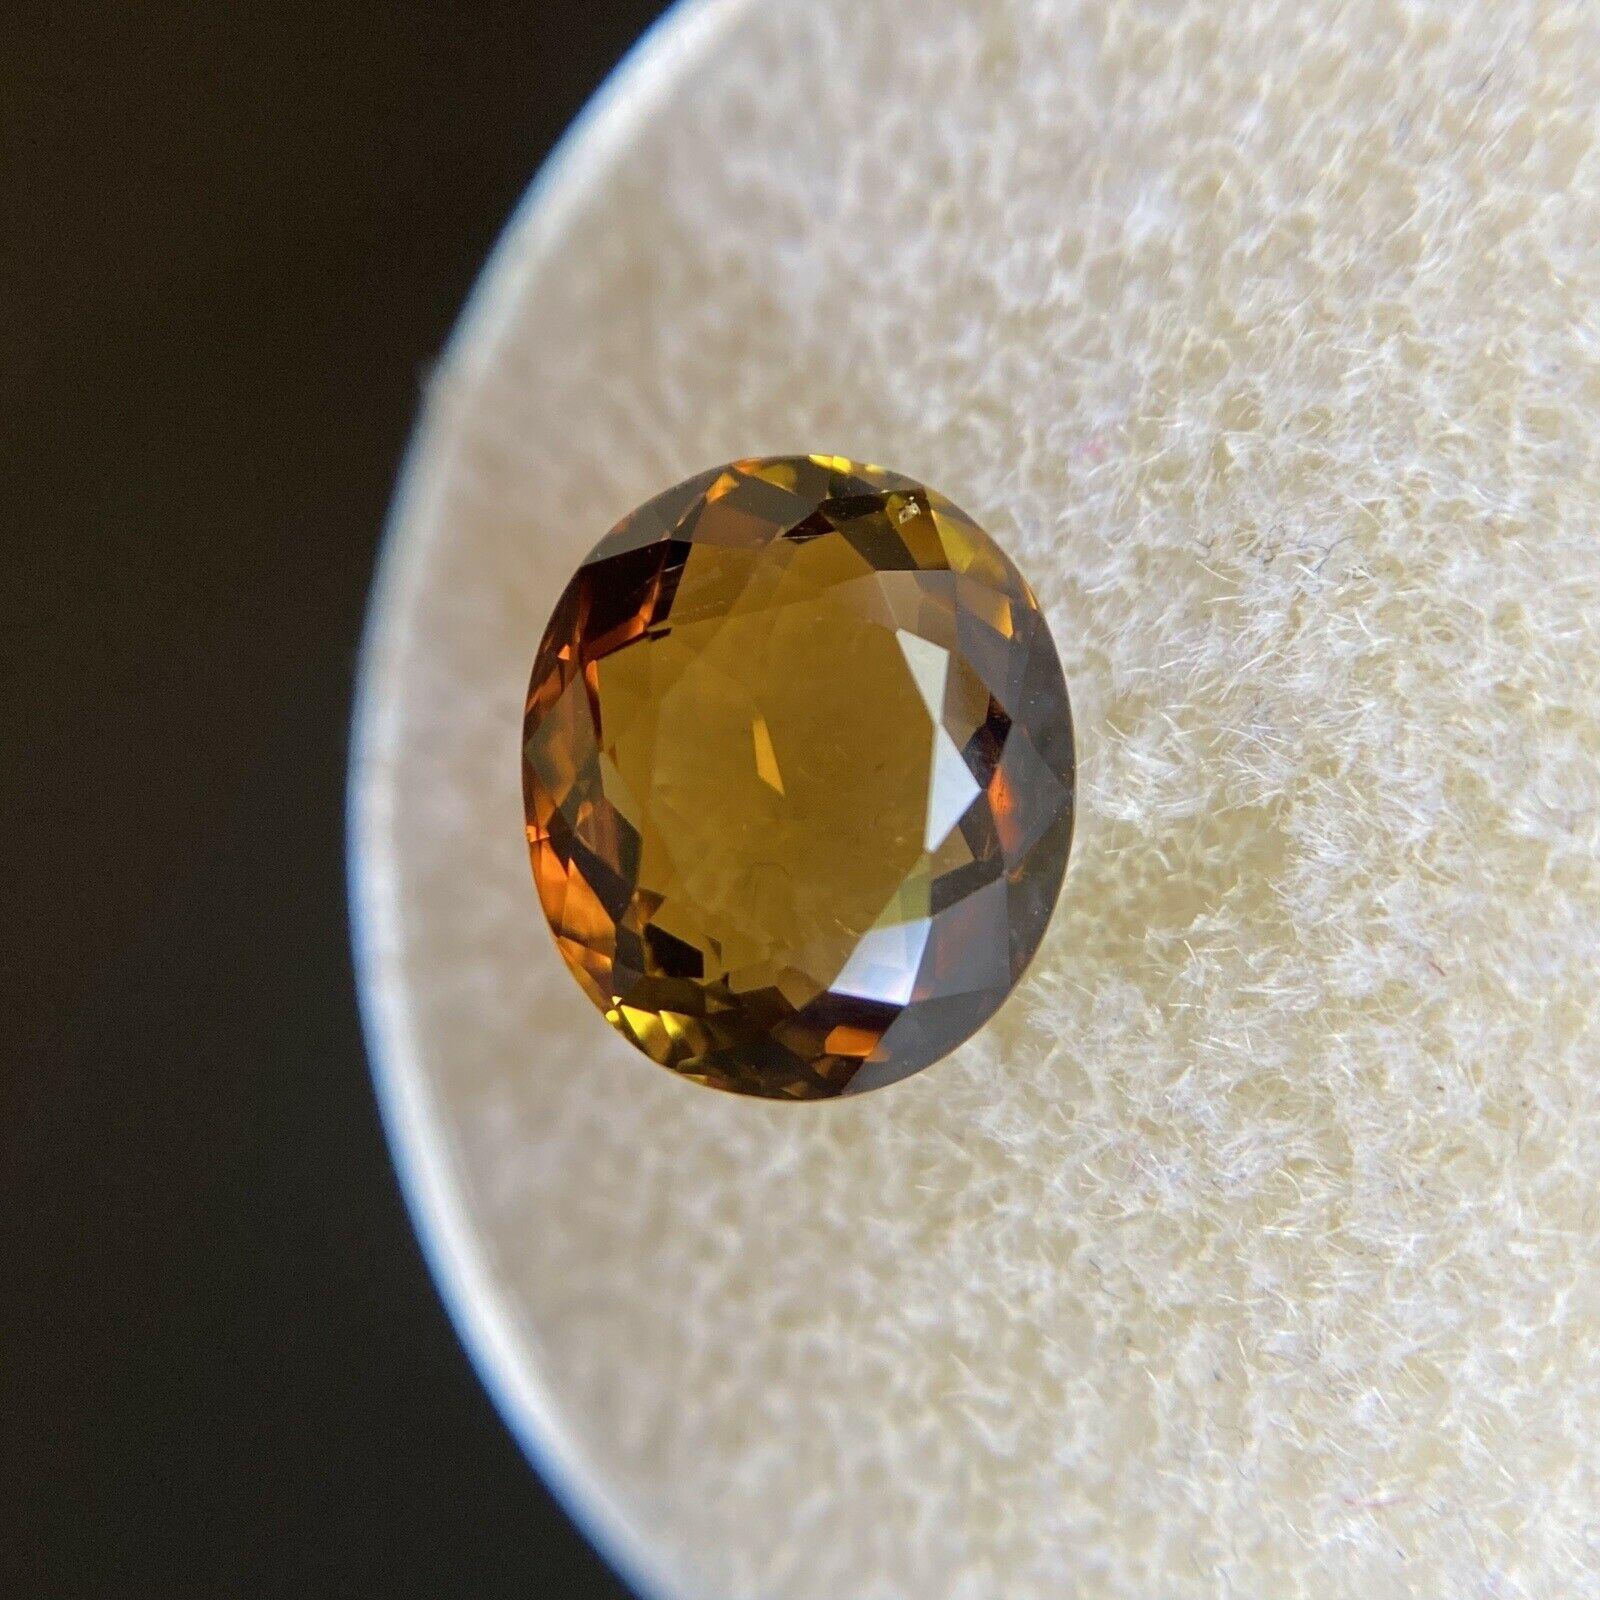 2.42ct Vivid Orange Yellow Tourmaline Oval Cut Loose Unique Rare Gem 9 x 8mm

Natural Yellow Orange Tourmaline Gemstone. 
2.42 Carat with a beautiful orange yellow colour and excellent clarity. Very clean stone with only some small natural